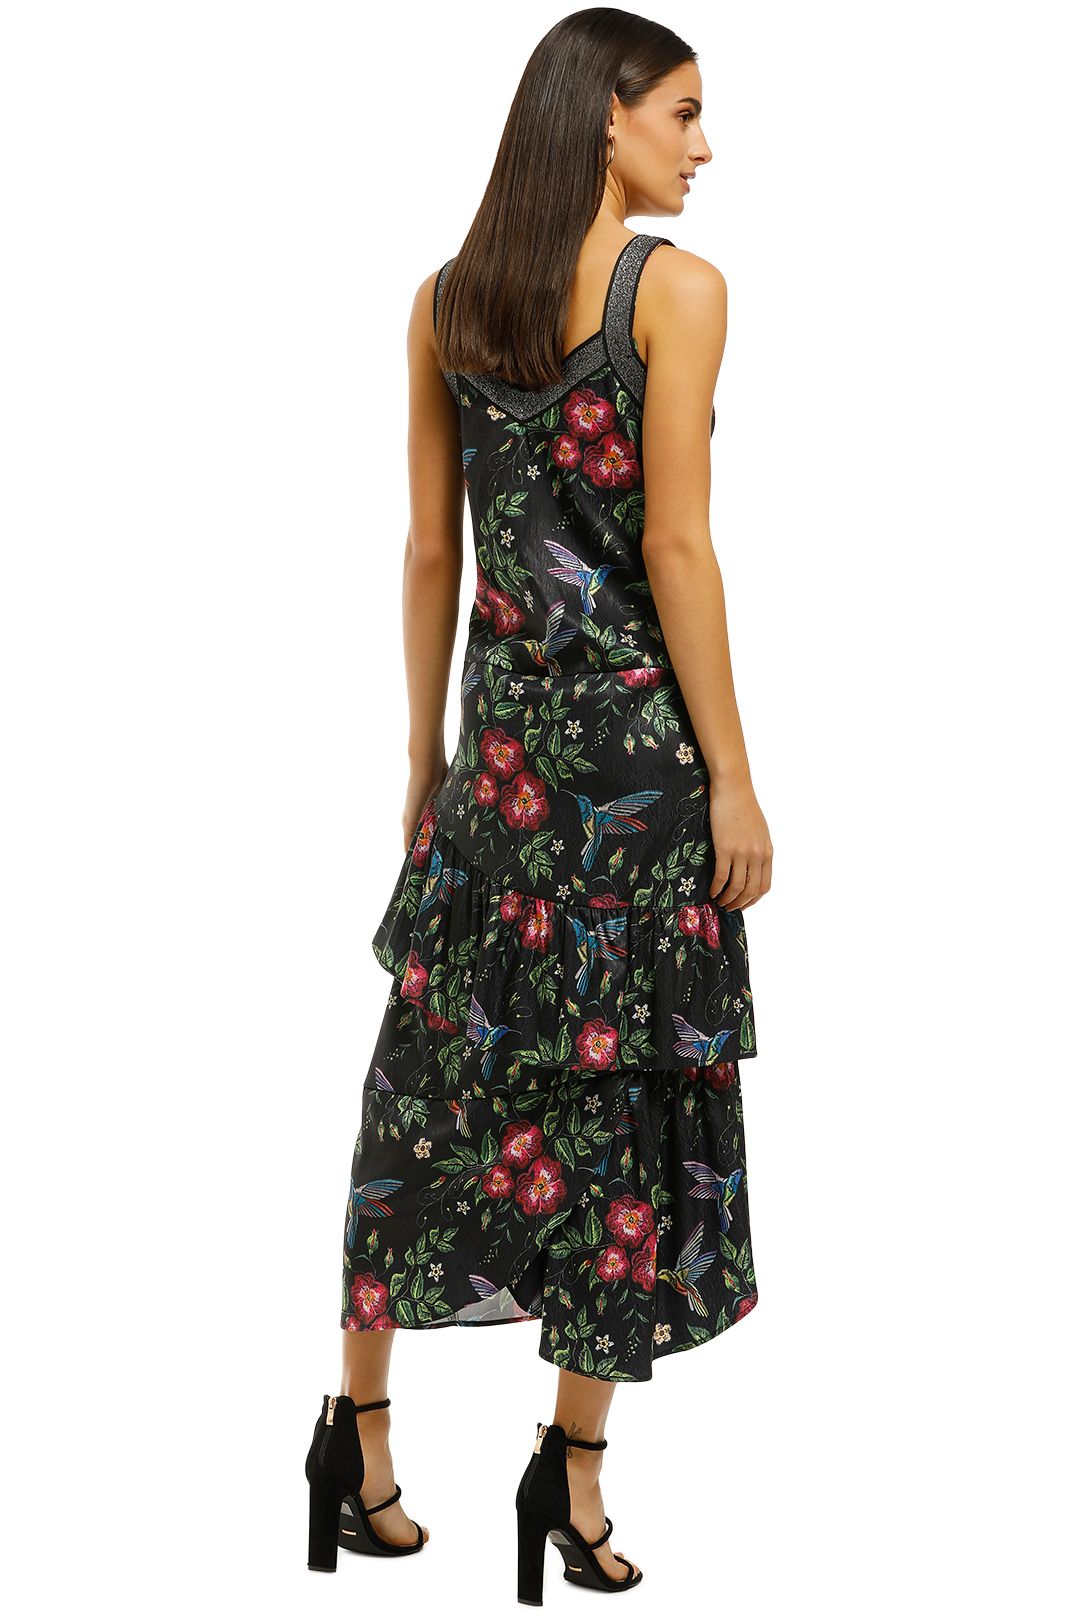 Curate-by-Trelise-Cooper-Ruffle-Feathers-Dress-Black-Floral-Back